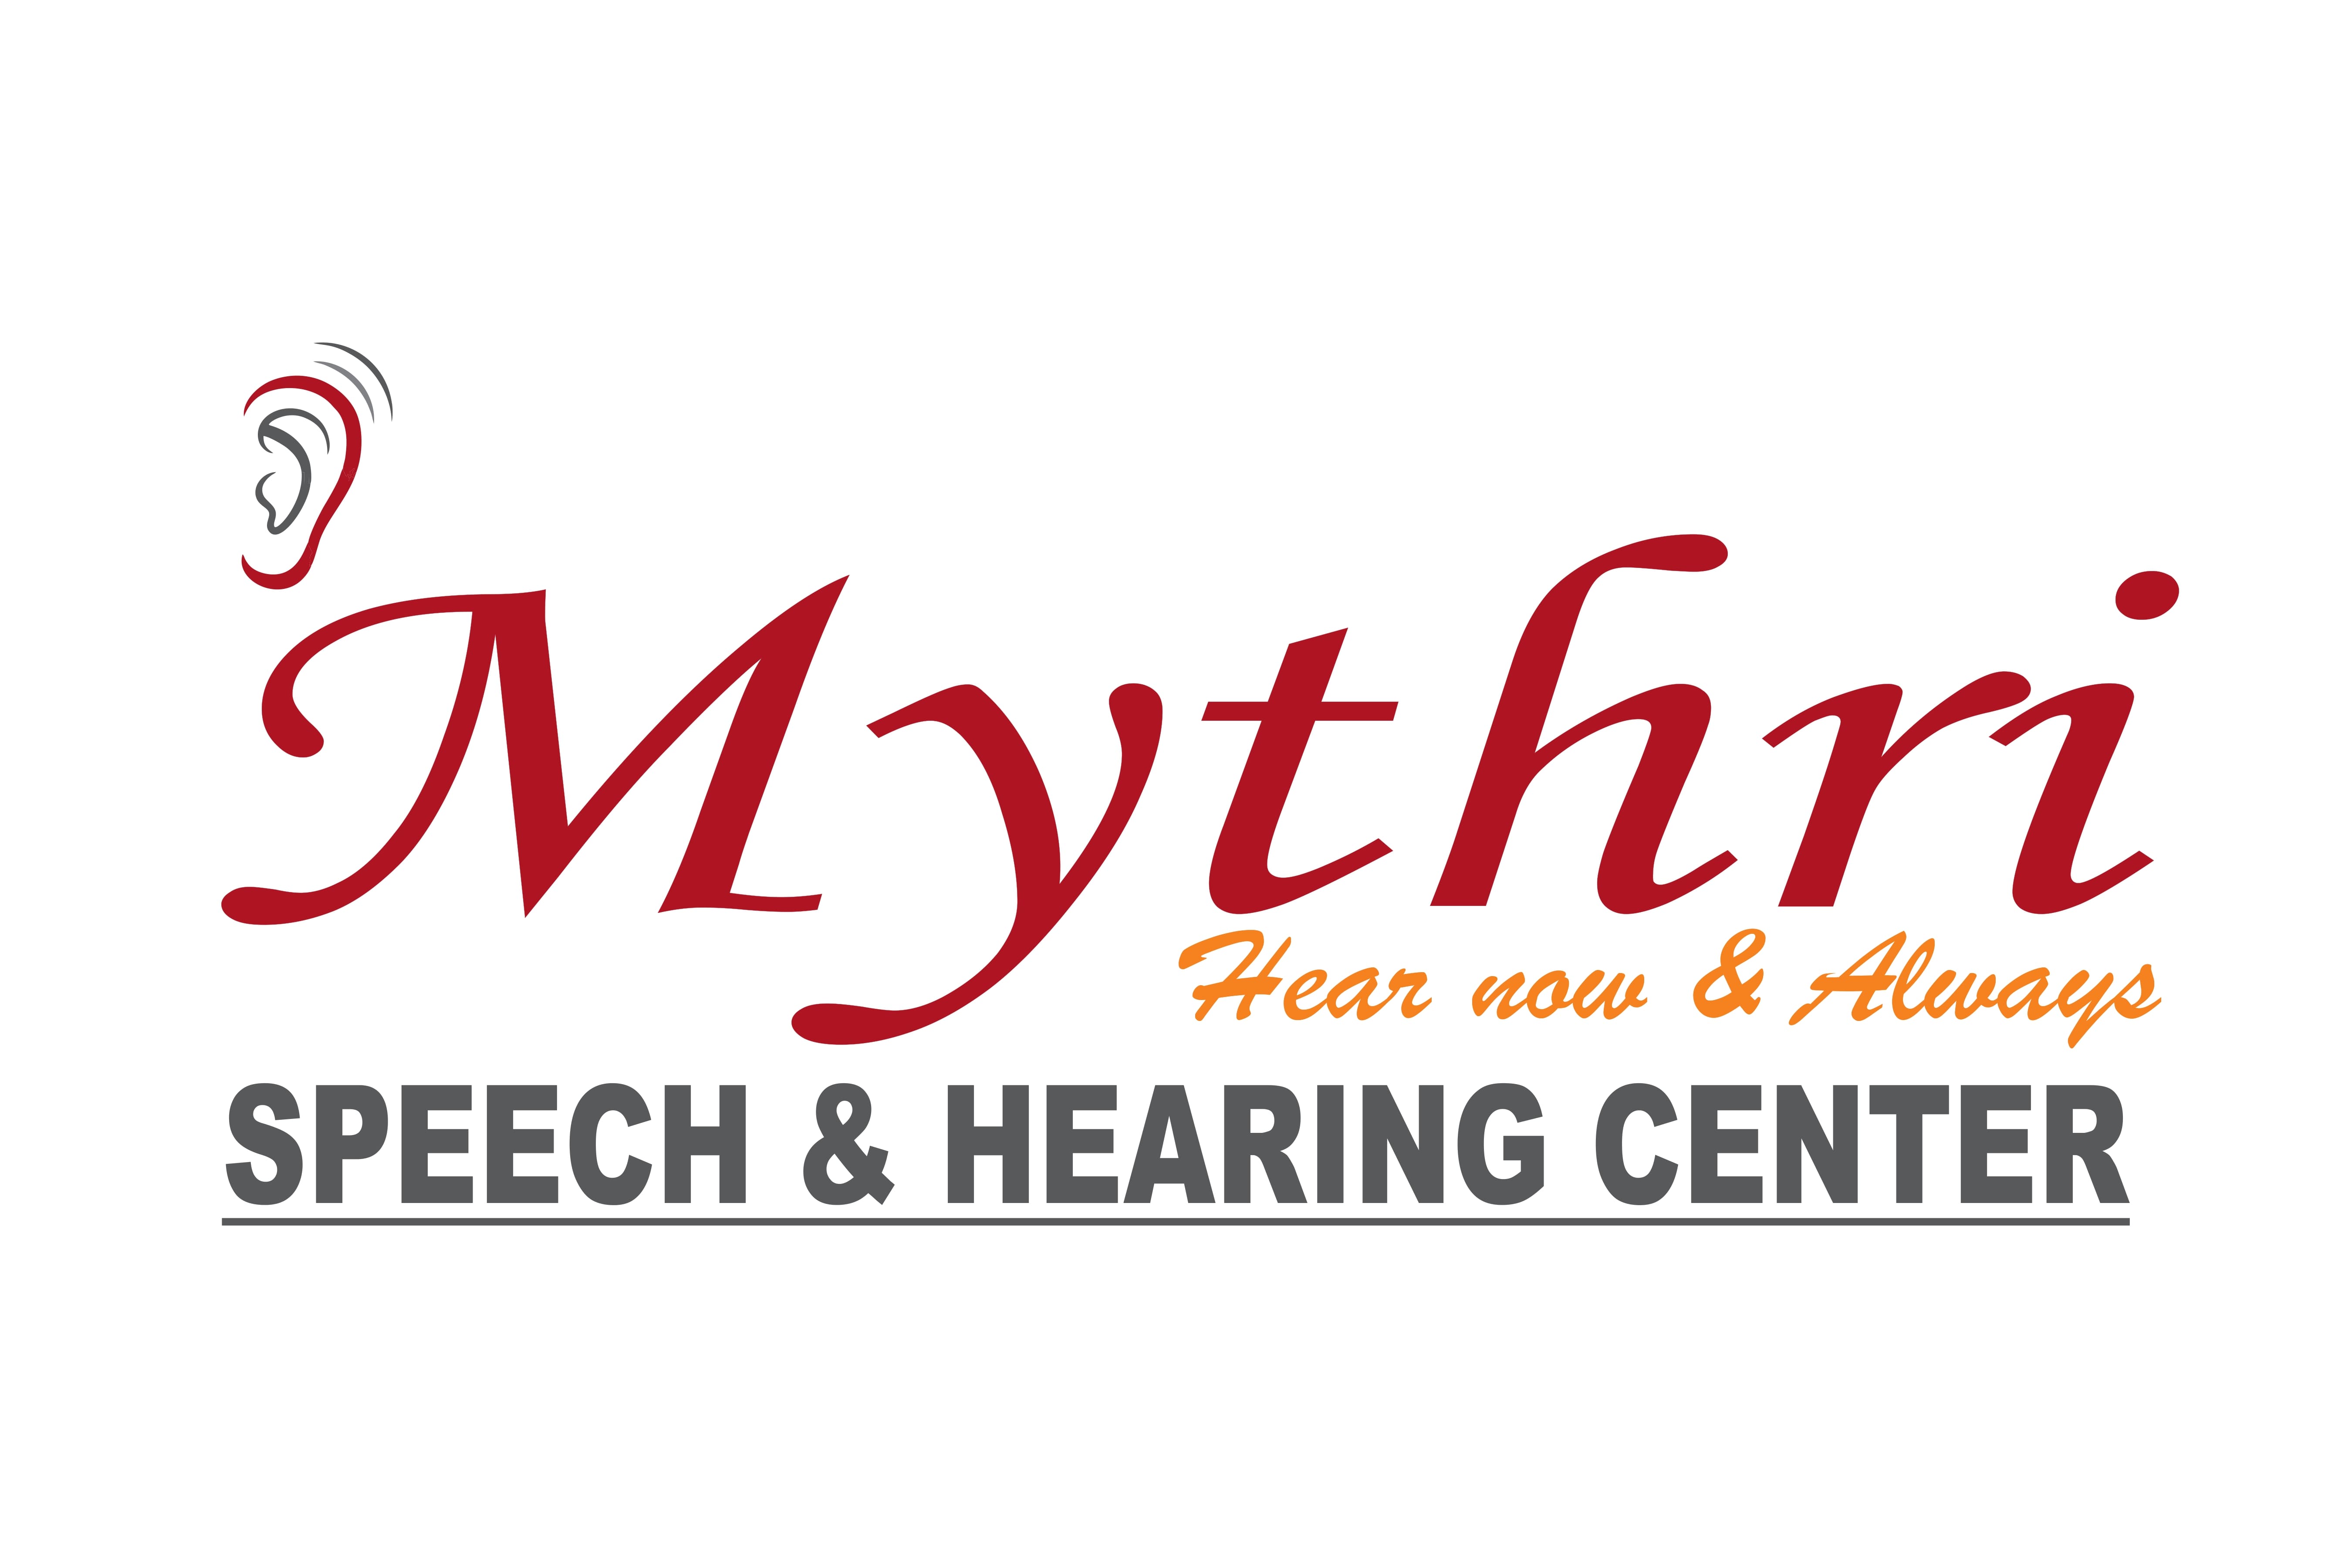 Mythri Speech And Hearing Center | Speech And Hearing Center | Speech Therapy Specialist | Hearing Loss Specialists | Certified Audiologist | Best Speech Therapist, Hyderabad, Telangana, India